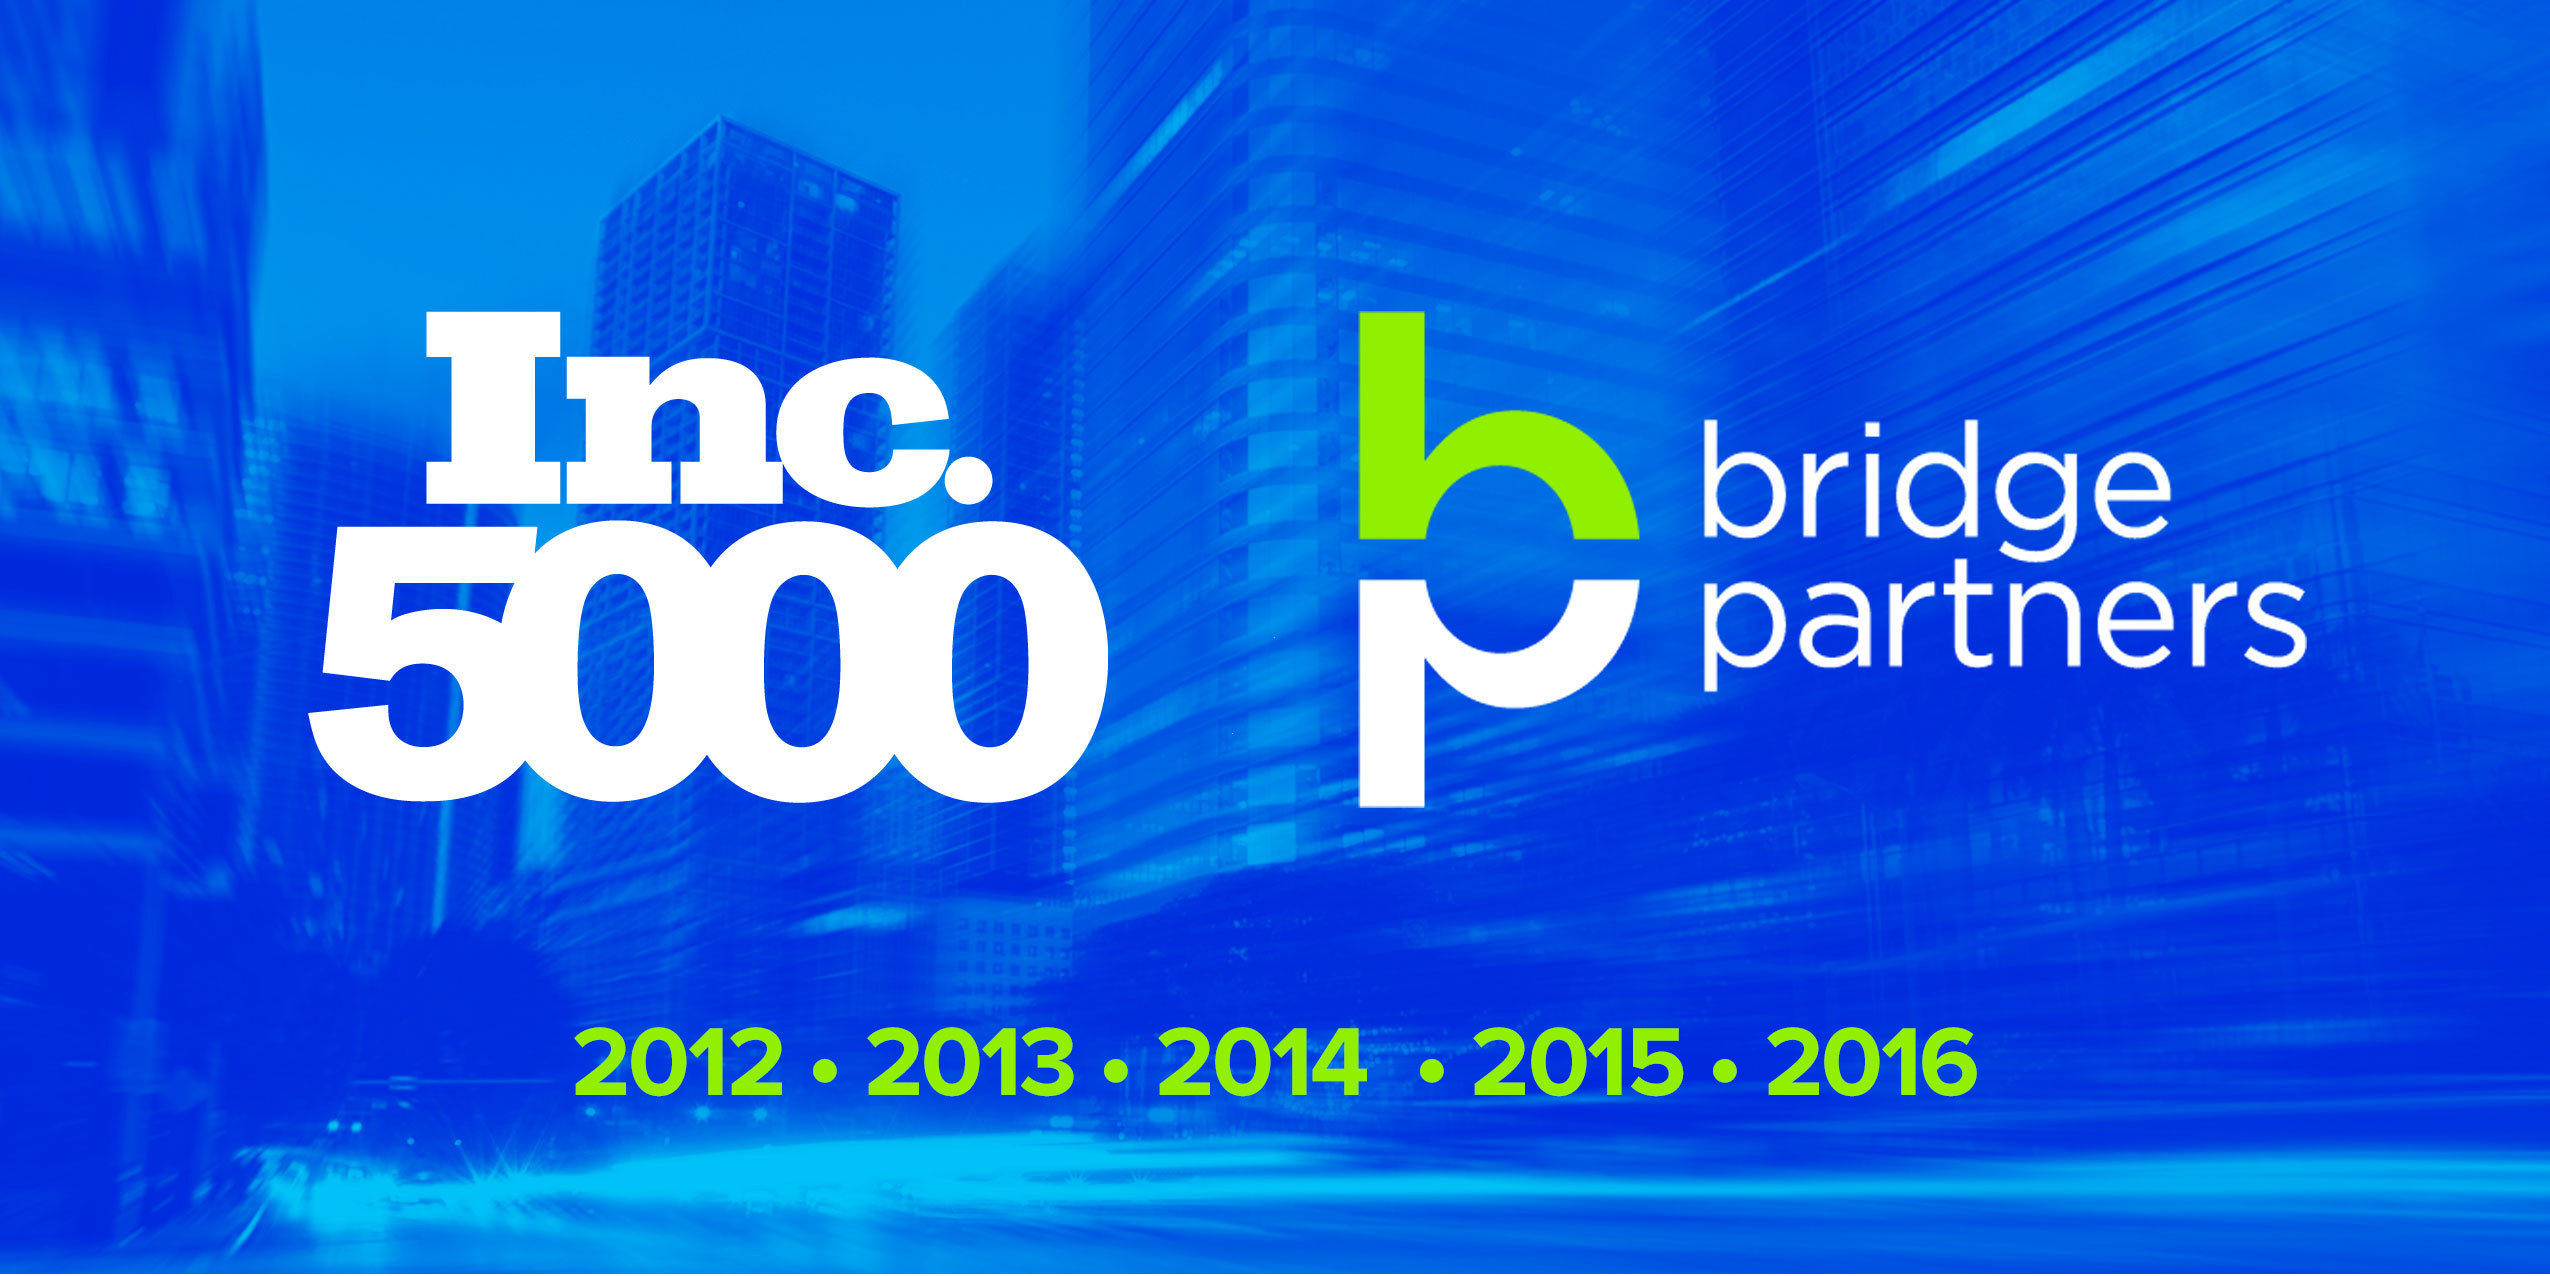 Bridge Partners Makes Inc. 5000 for Fifth Straight Year